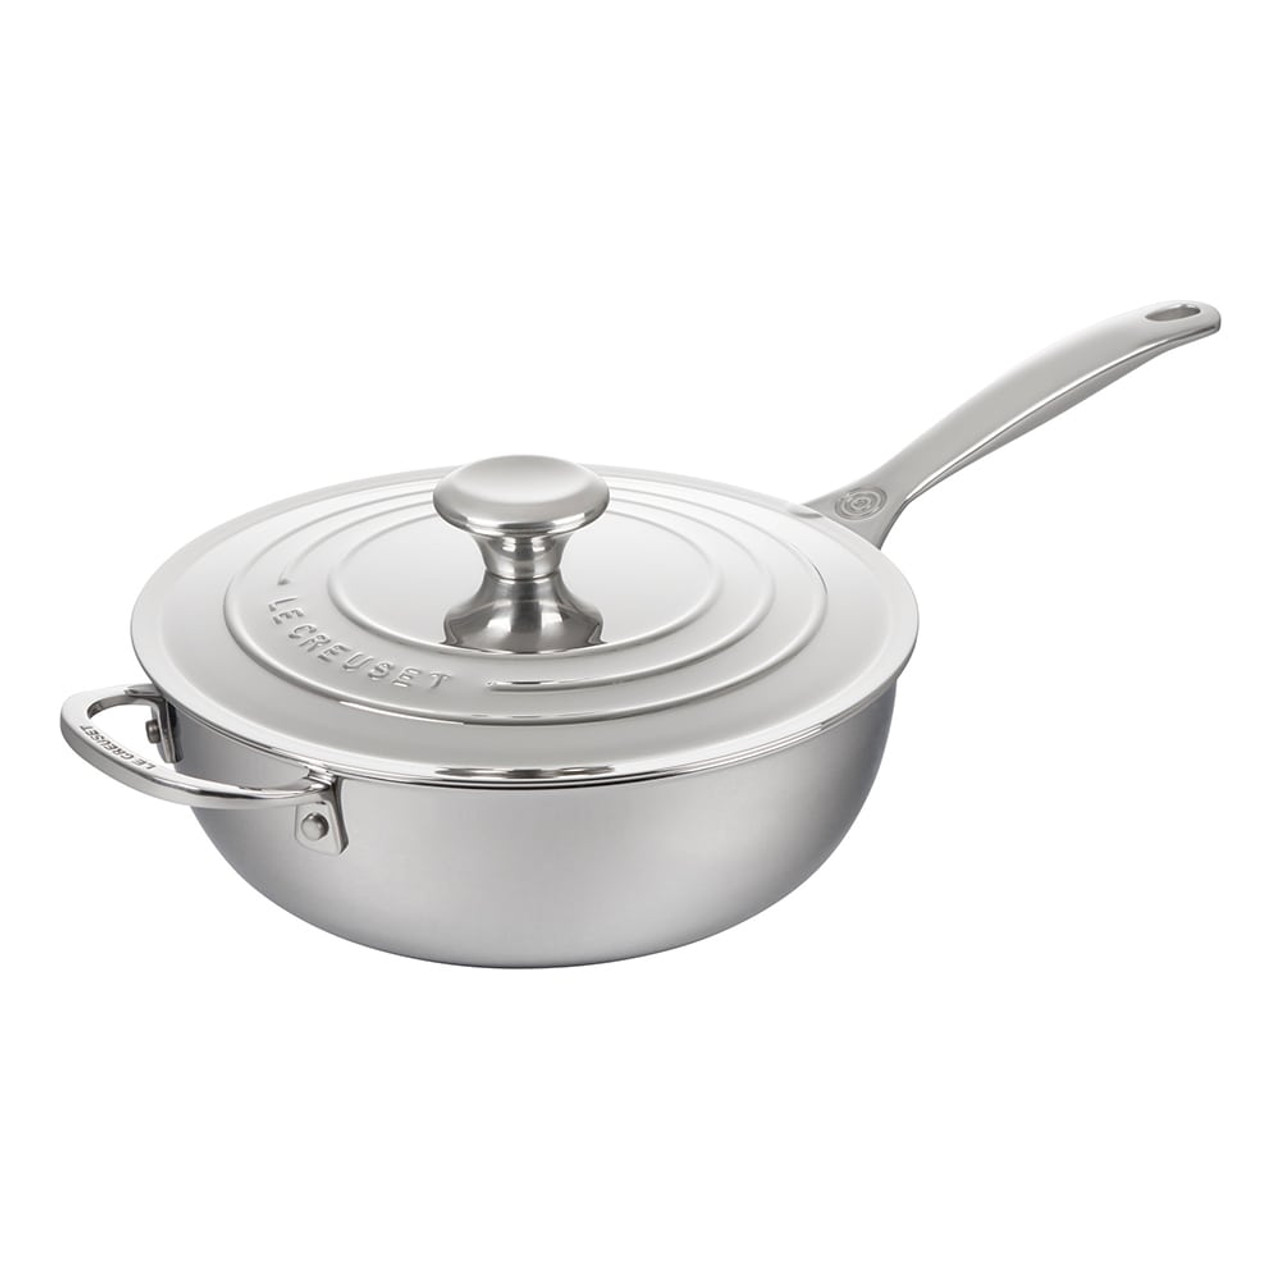 https://cdn11.bigcommerce.com/s-hccytny0od/images/stencil/1280x1280/products/3925/14291/le-creuset-stainless-steel-saucier-pan__75412.1612875255.jpg?c=2?imbypass=on